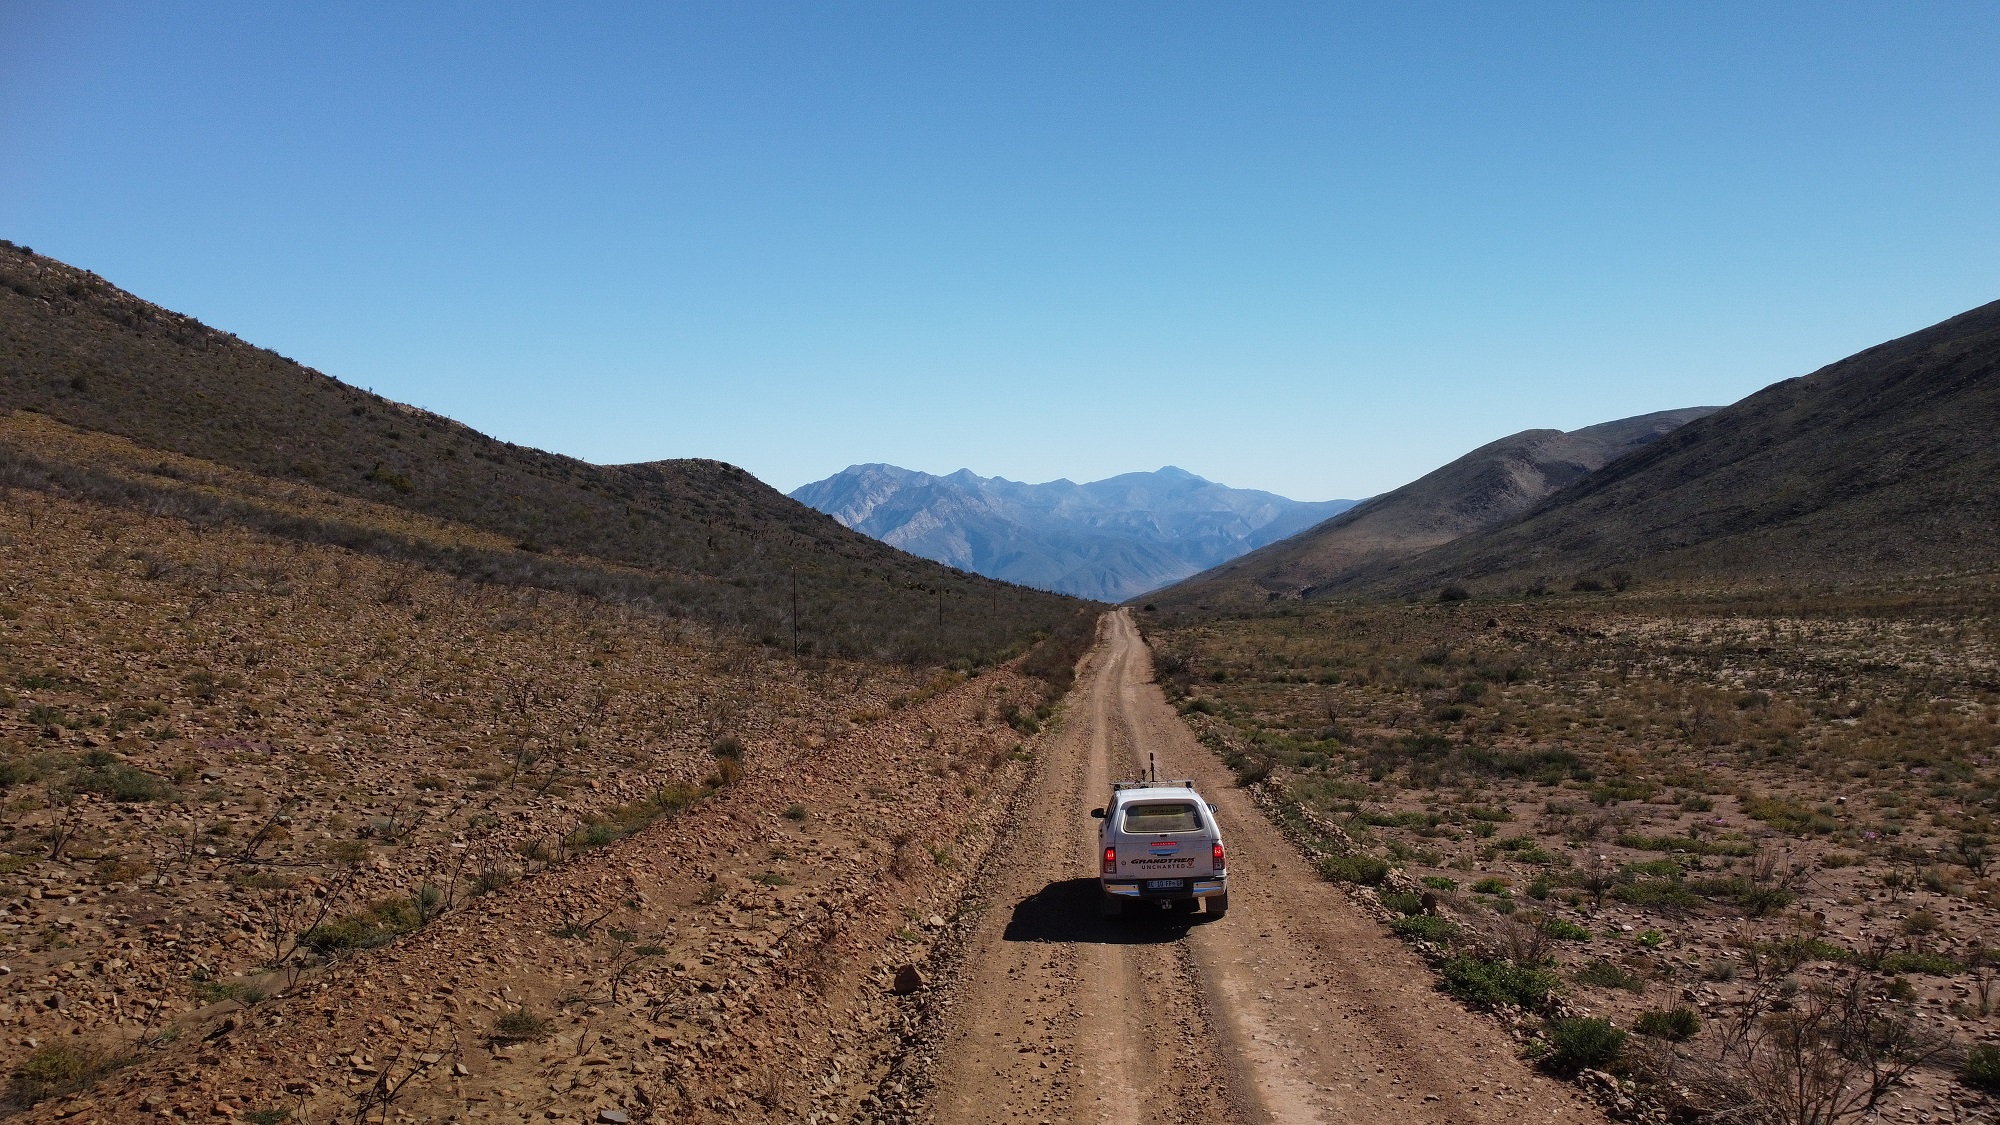 Taking roads less travelled to go places Google hasn’t been